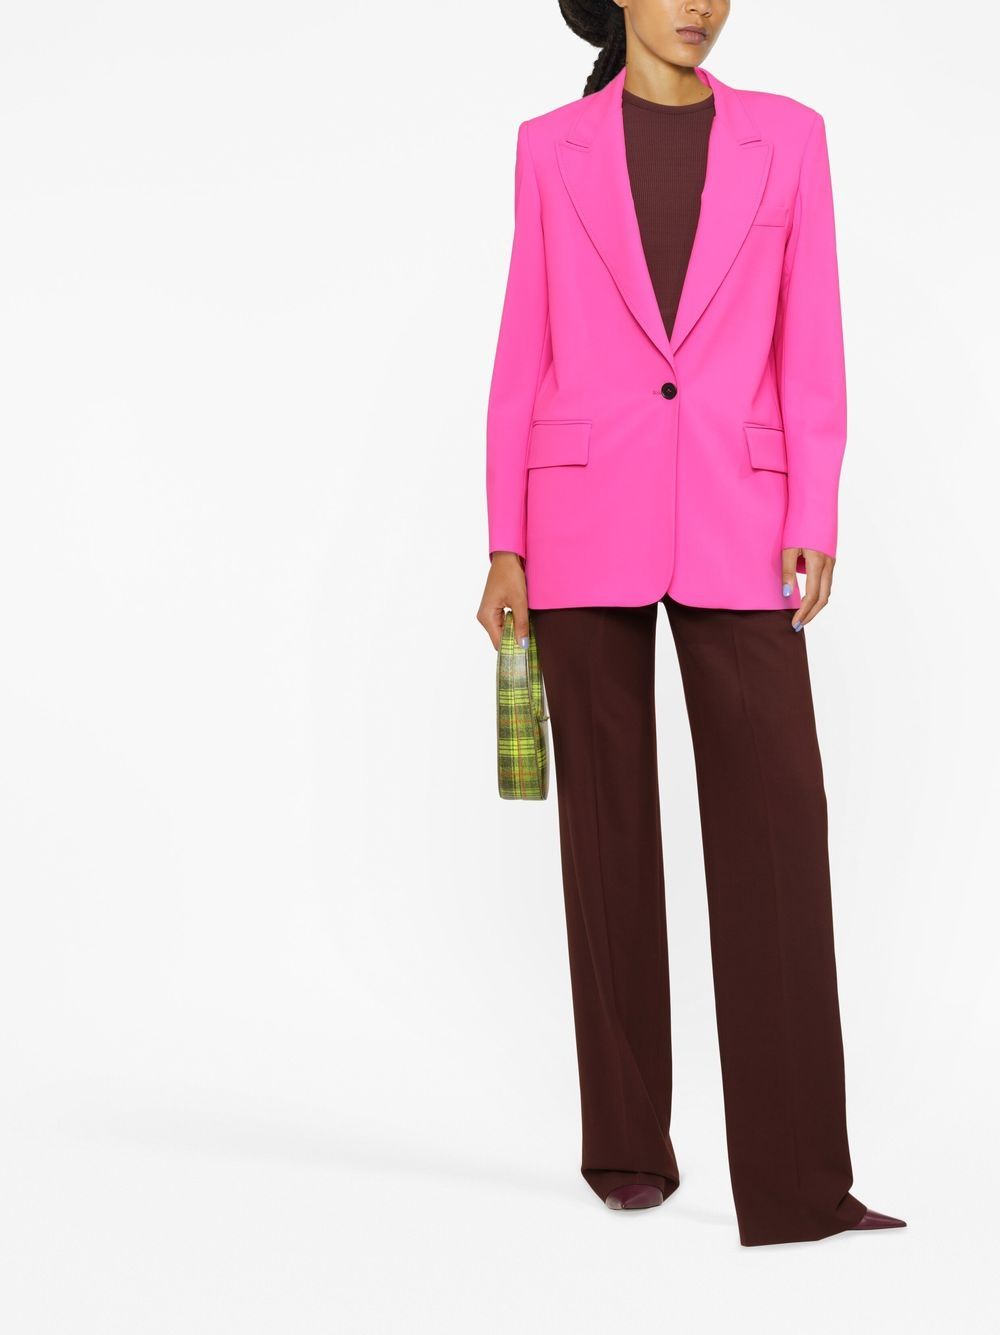 Buttoned-up single-breasted blazer, pink